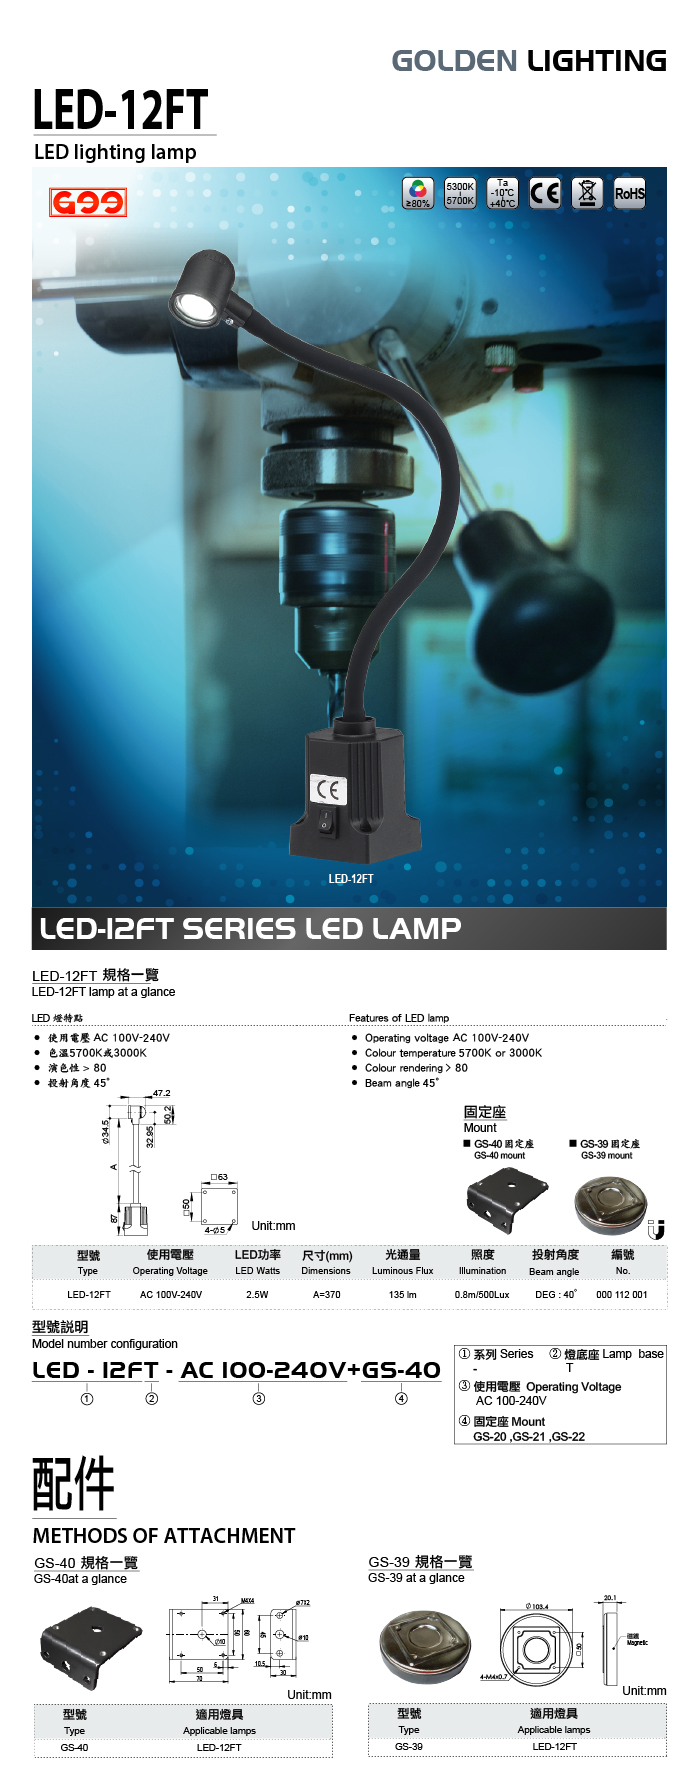 LED-12FT concentrated LED lighting lamp-flexible